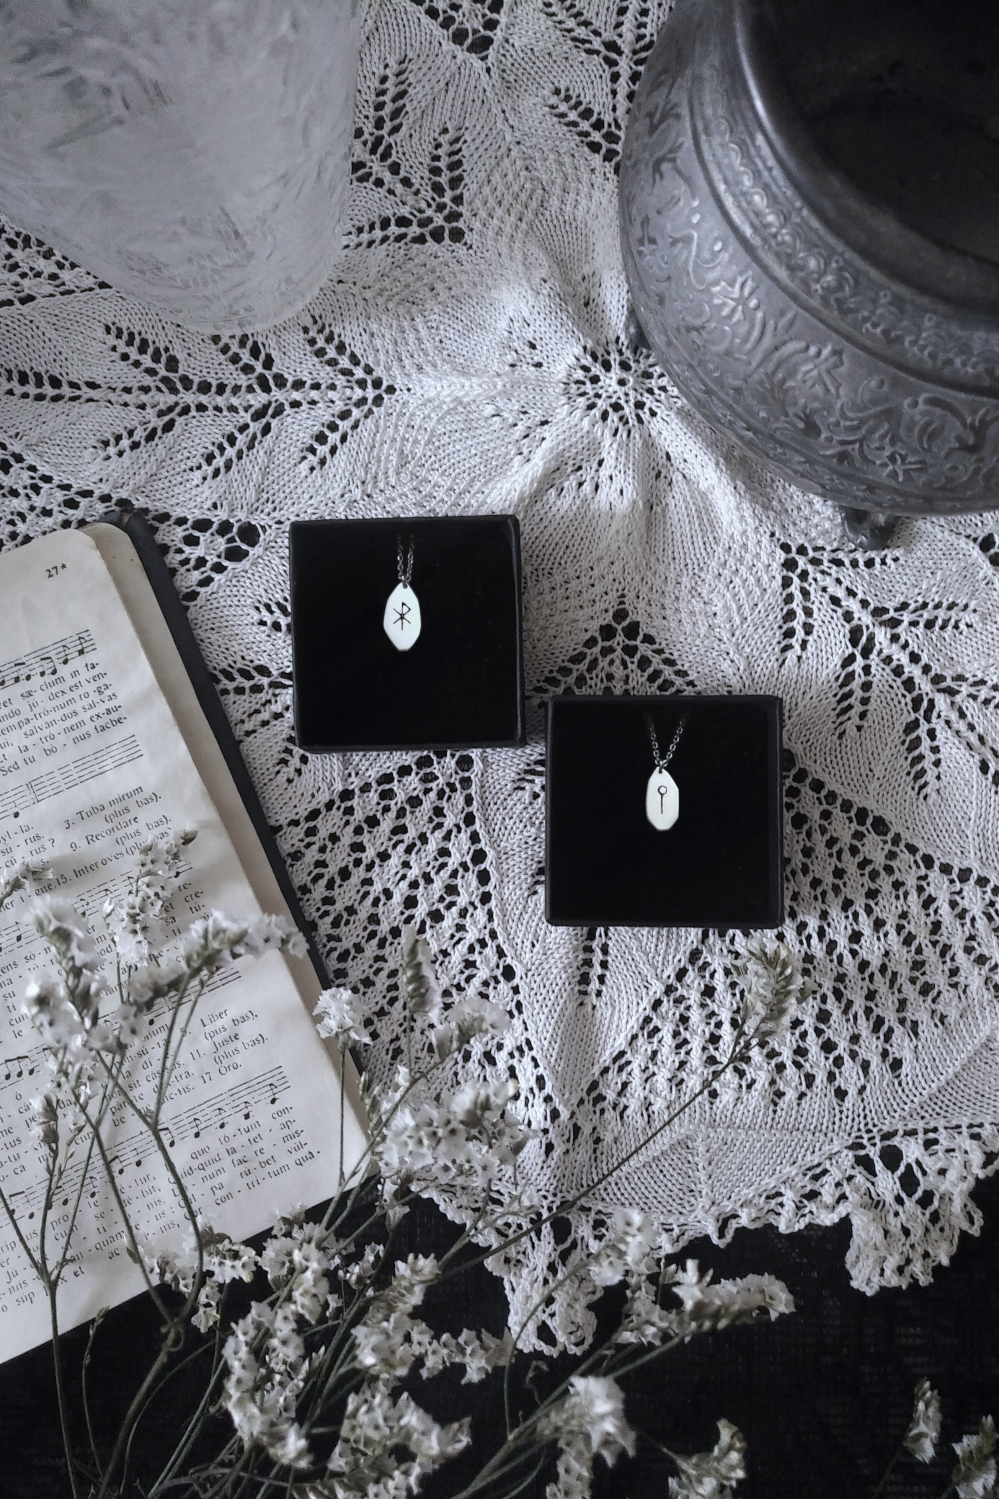 Silver Runic amulets with love Bind-Rune and Sol medieval rune with antique book & cauldron